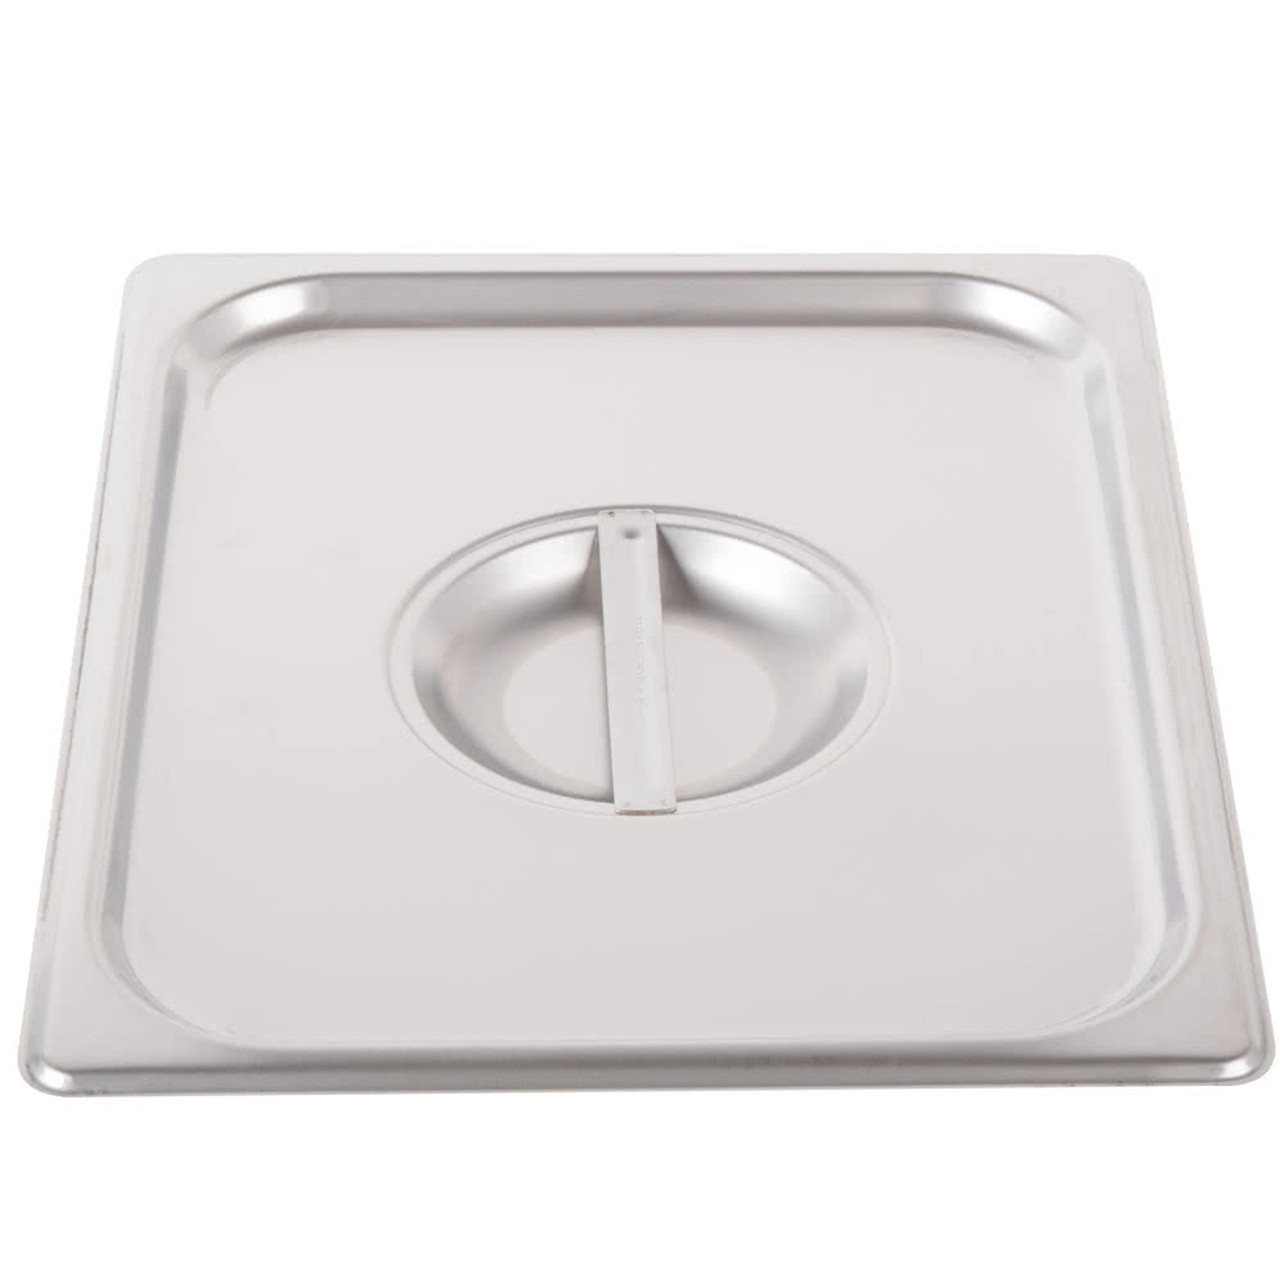 Stainless Steel Solid Steam Table / Hotel Pan Cover-1/3 Size 